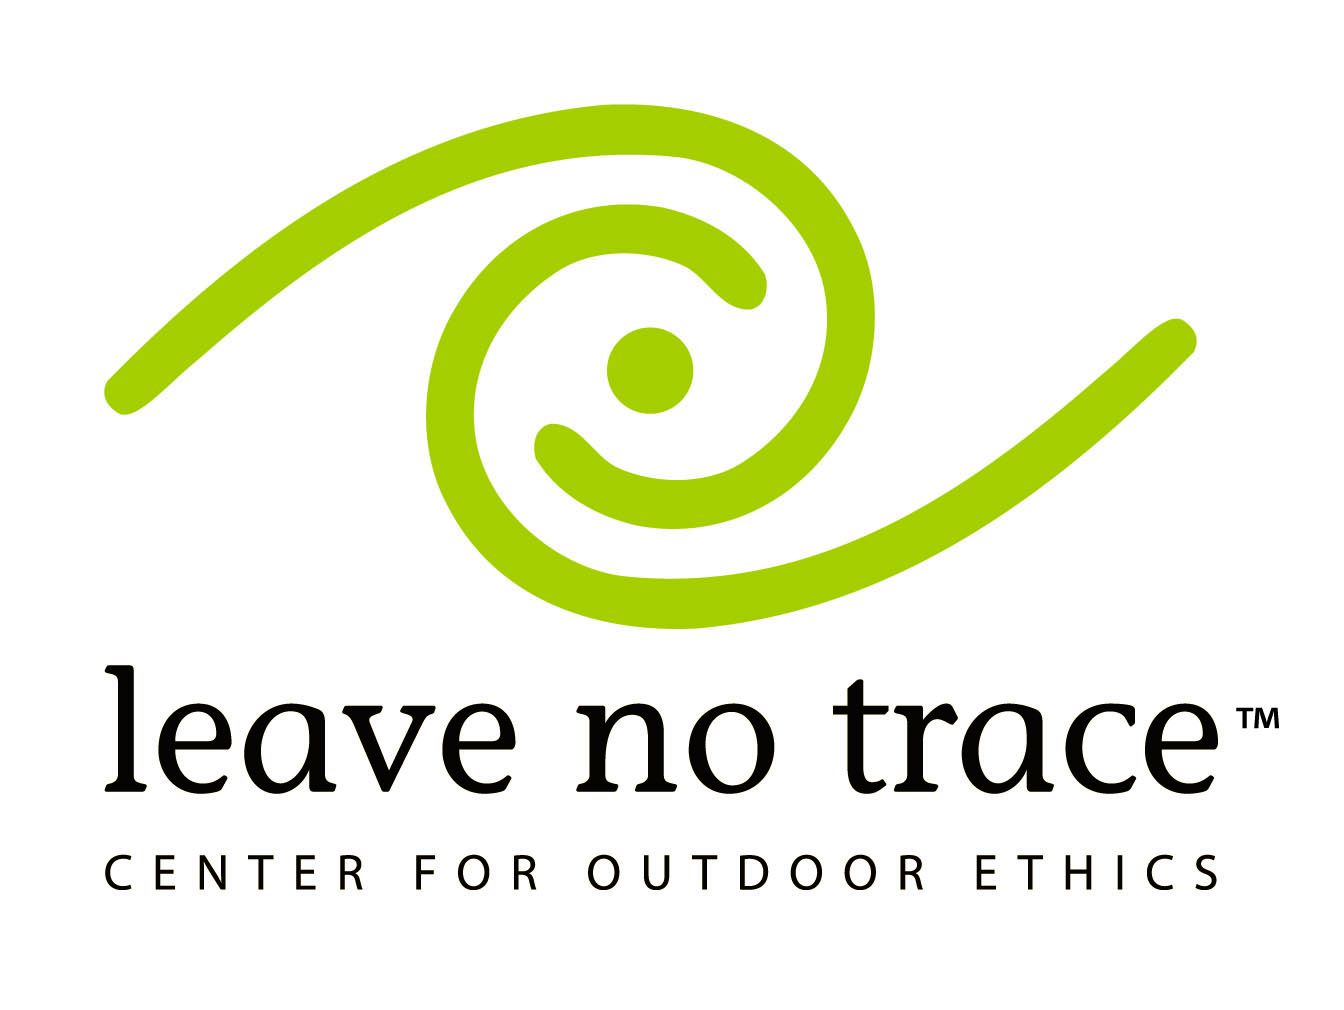 We are proud Leave no trace partners